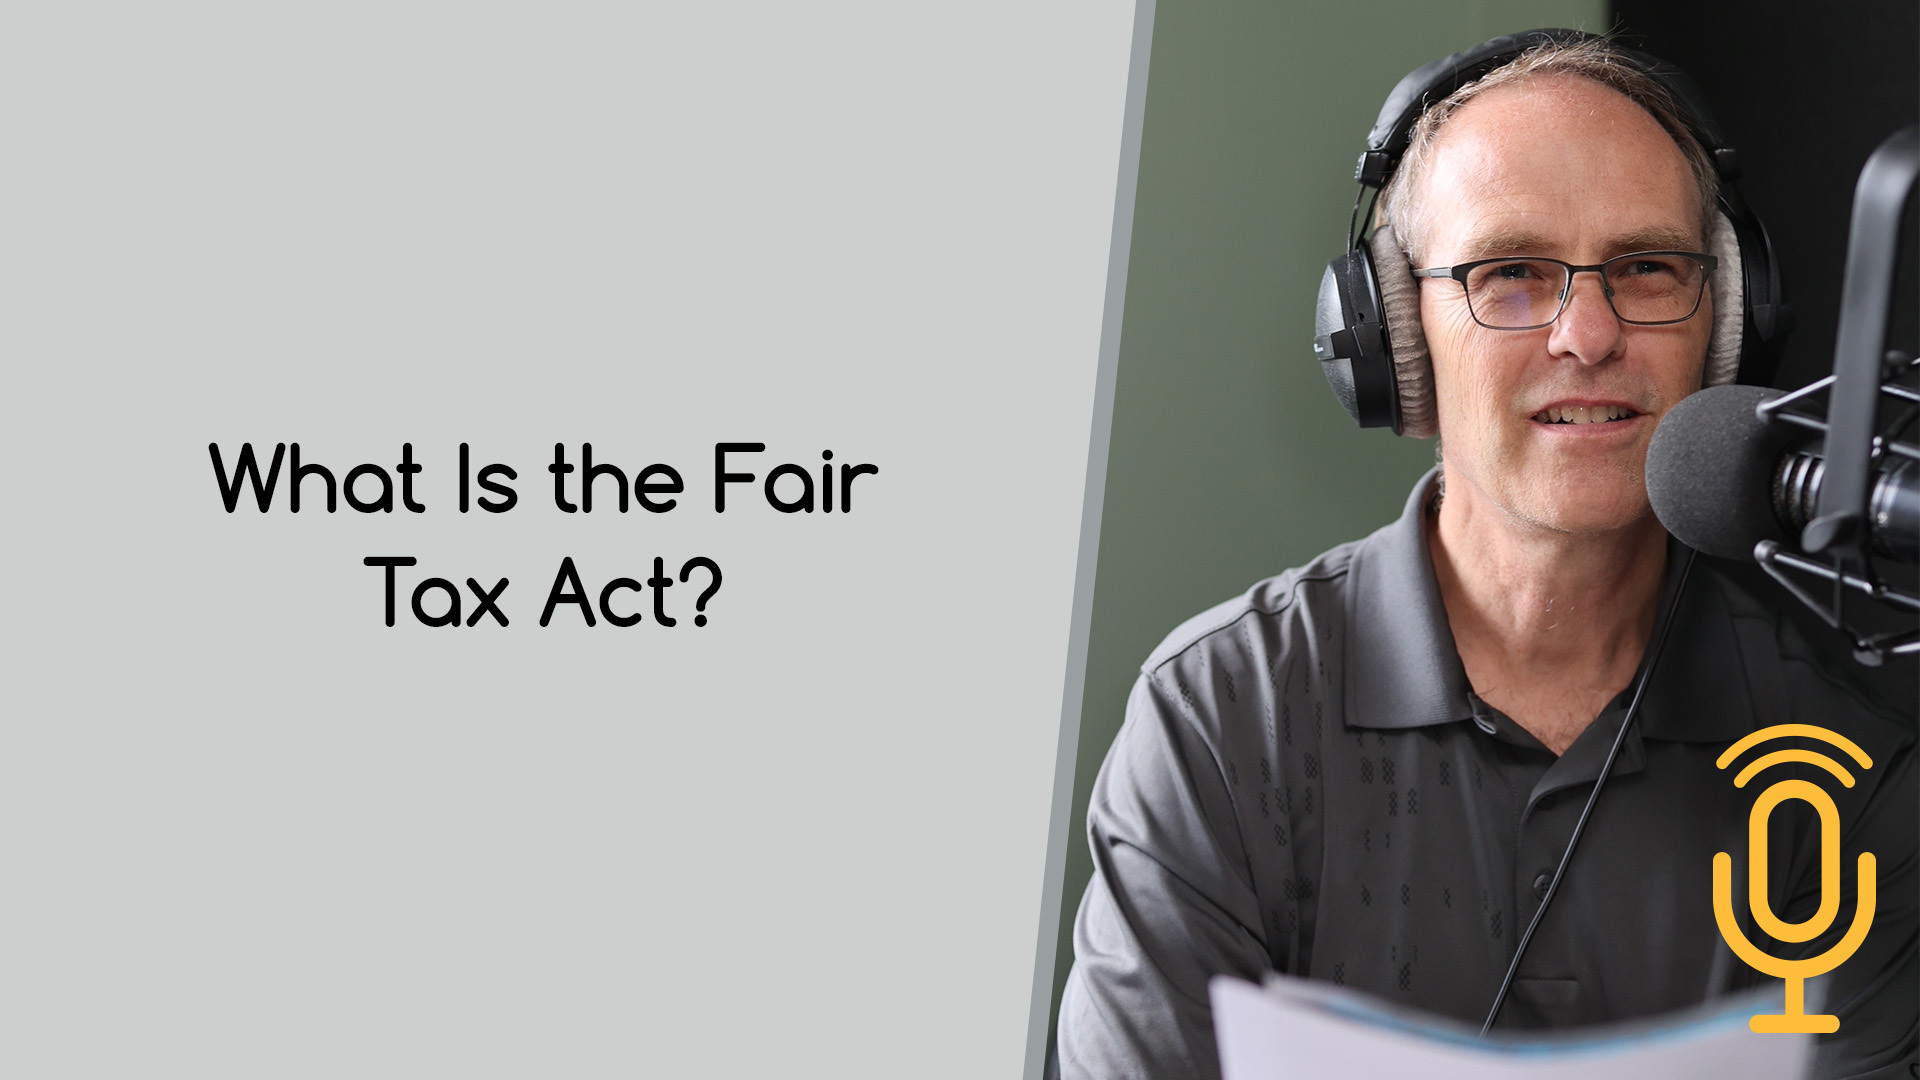 What Is the Fair Tax Act? Paul Winkler, Inc